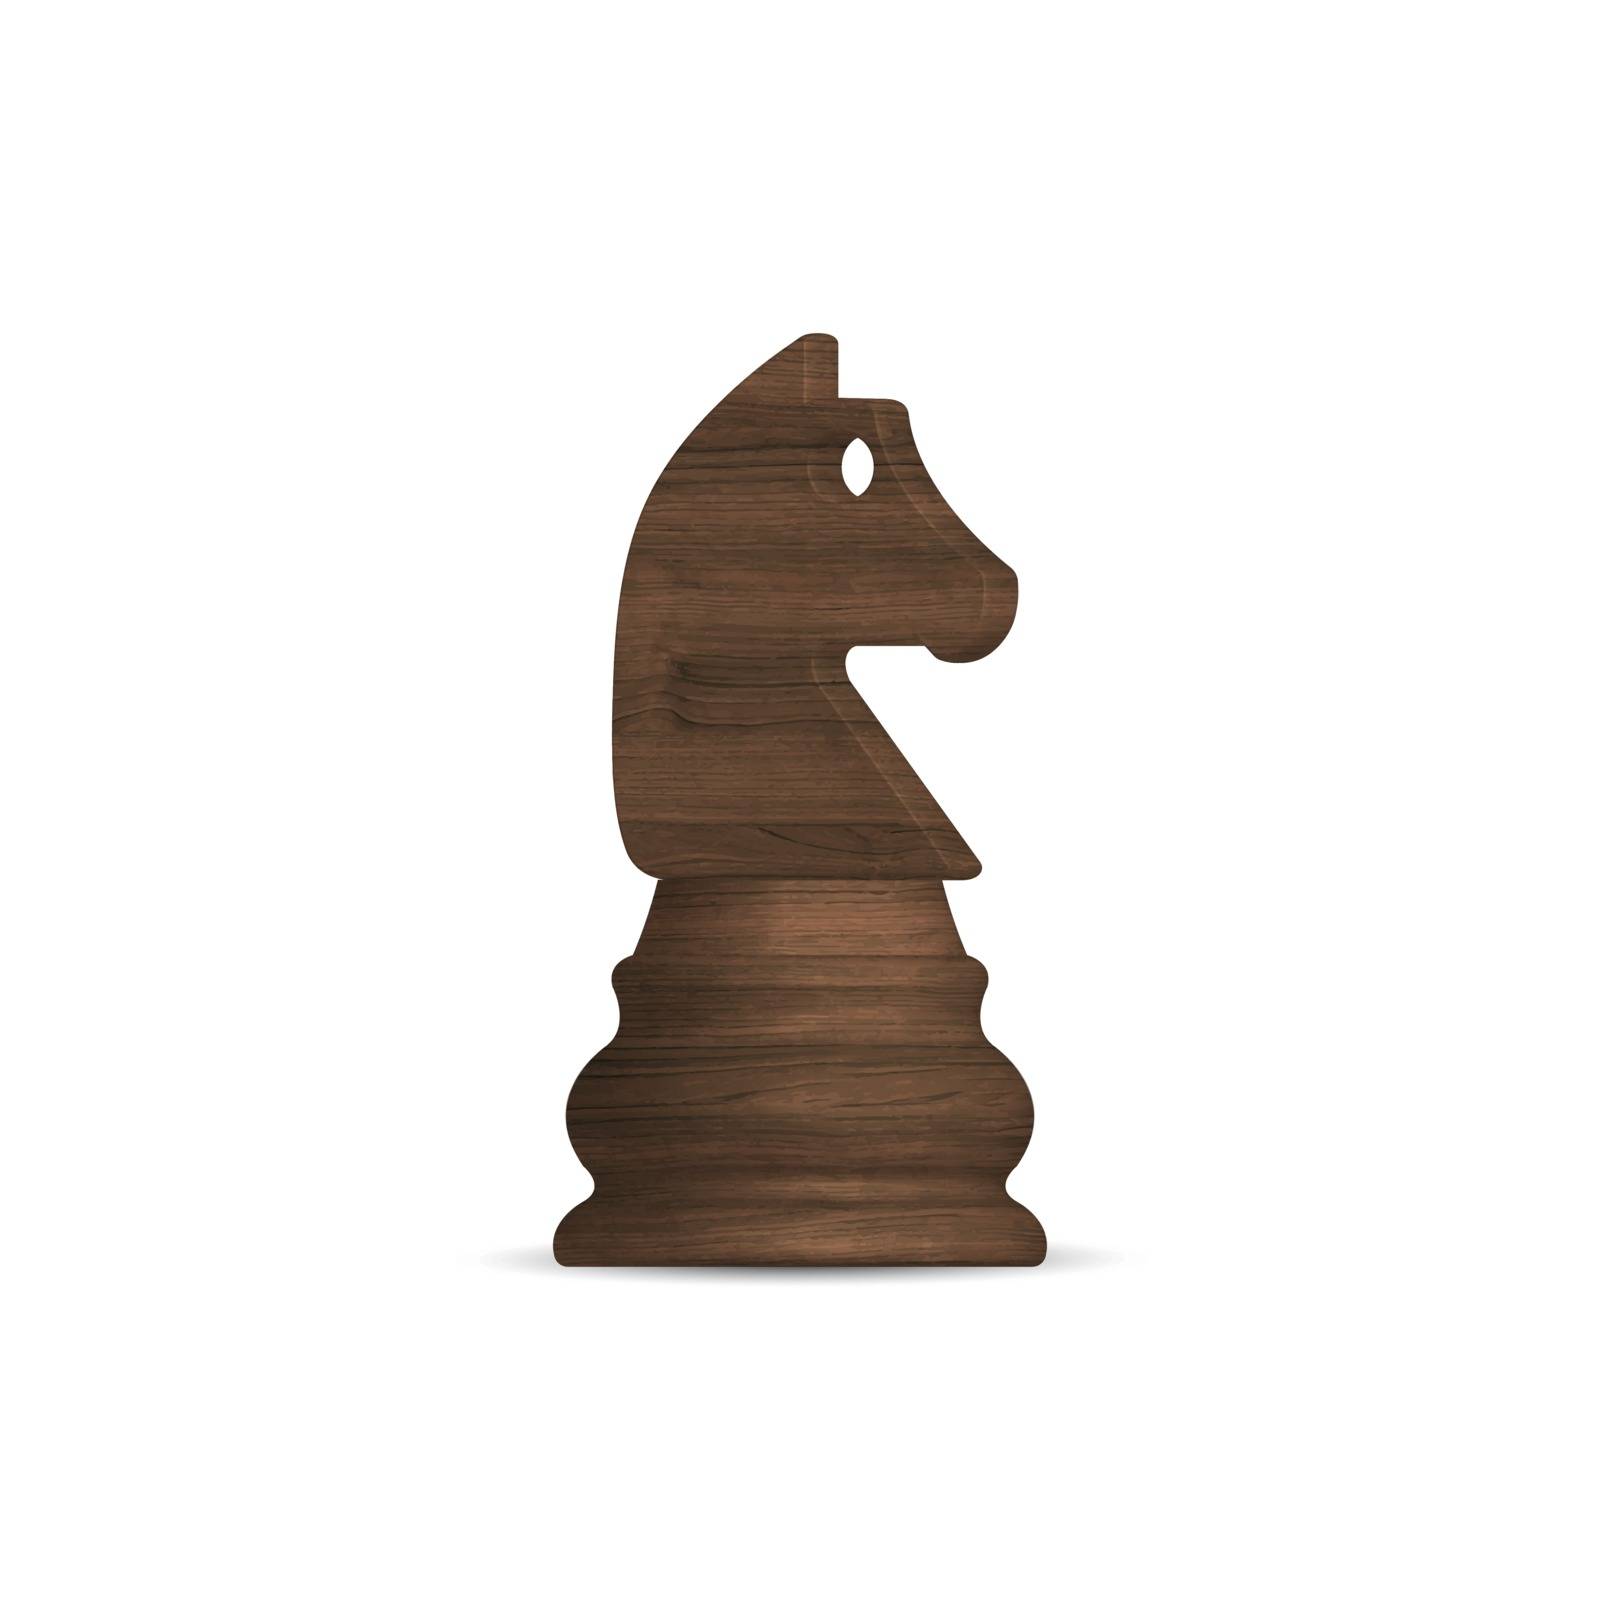 Black wooden chess piece knight, vector illustration. by kup1984